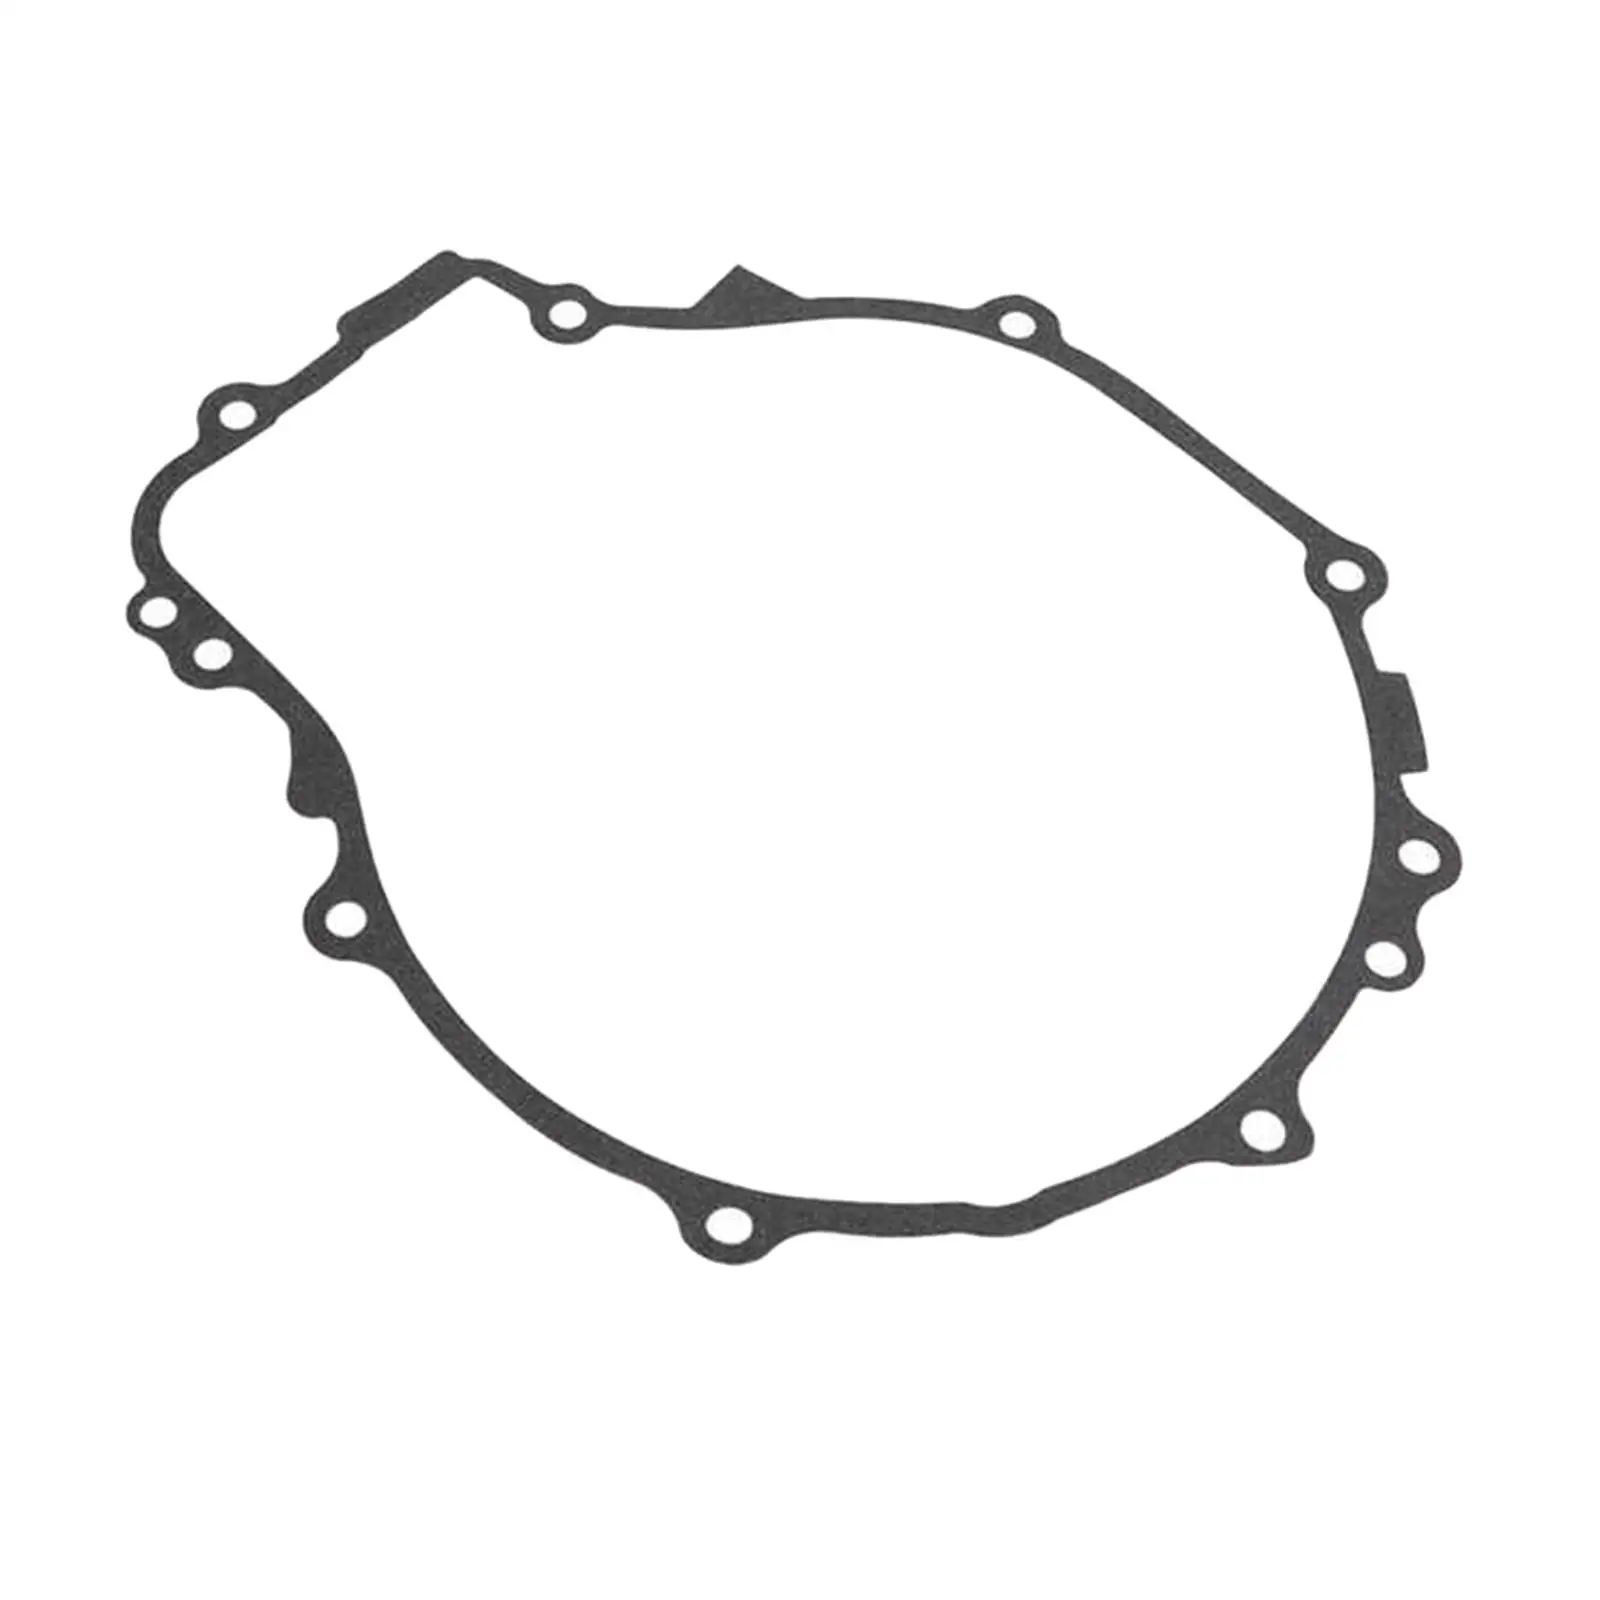 Auto Pull Start Gasket 3084933 for Polaris Sportsman 500 1996?2011 Replacement Easy Installation